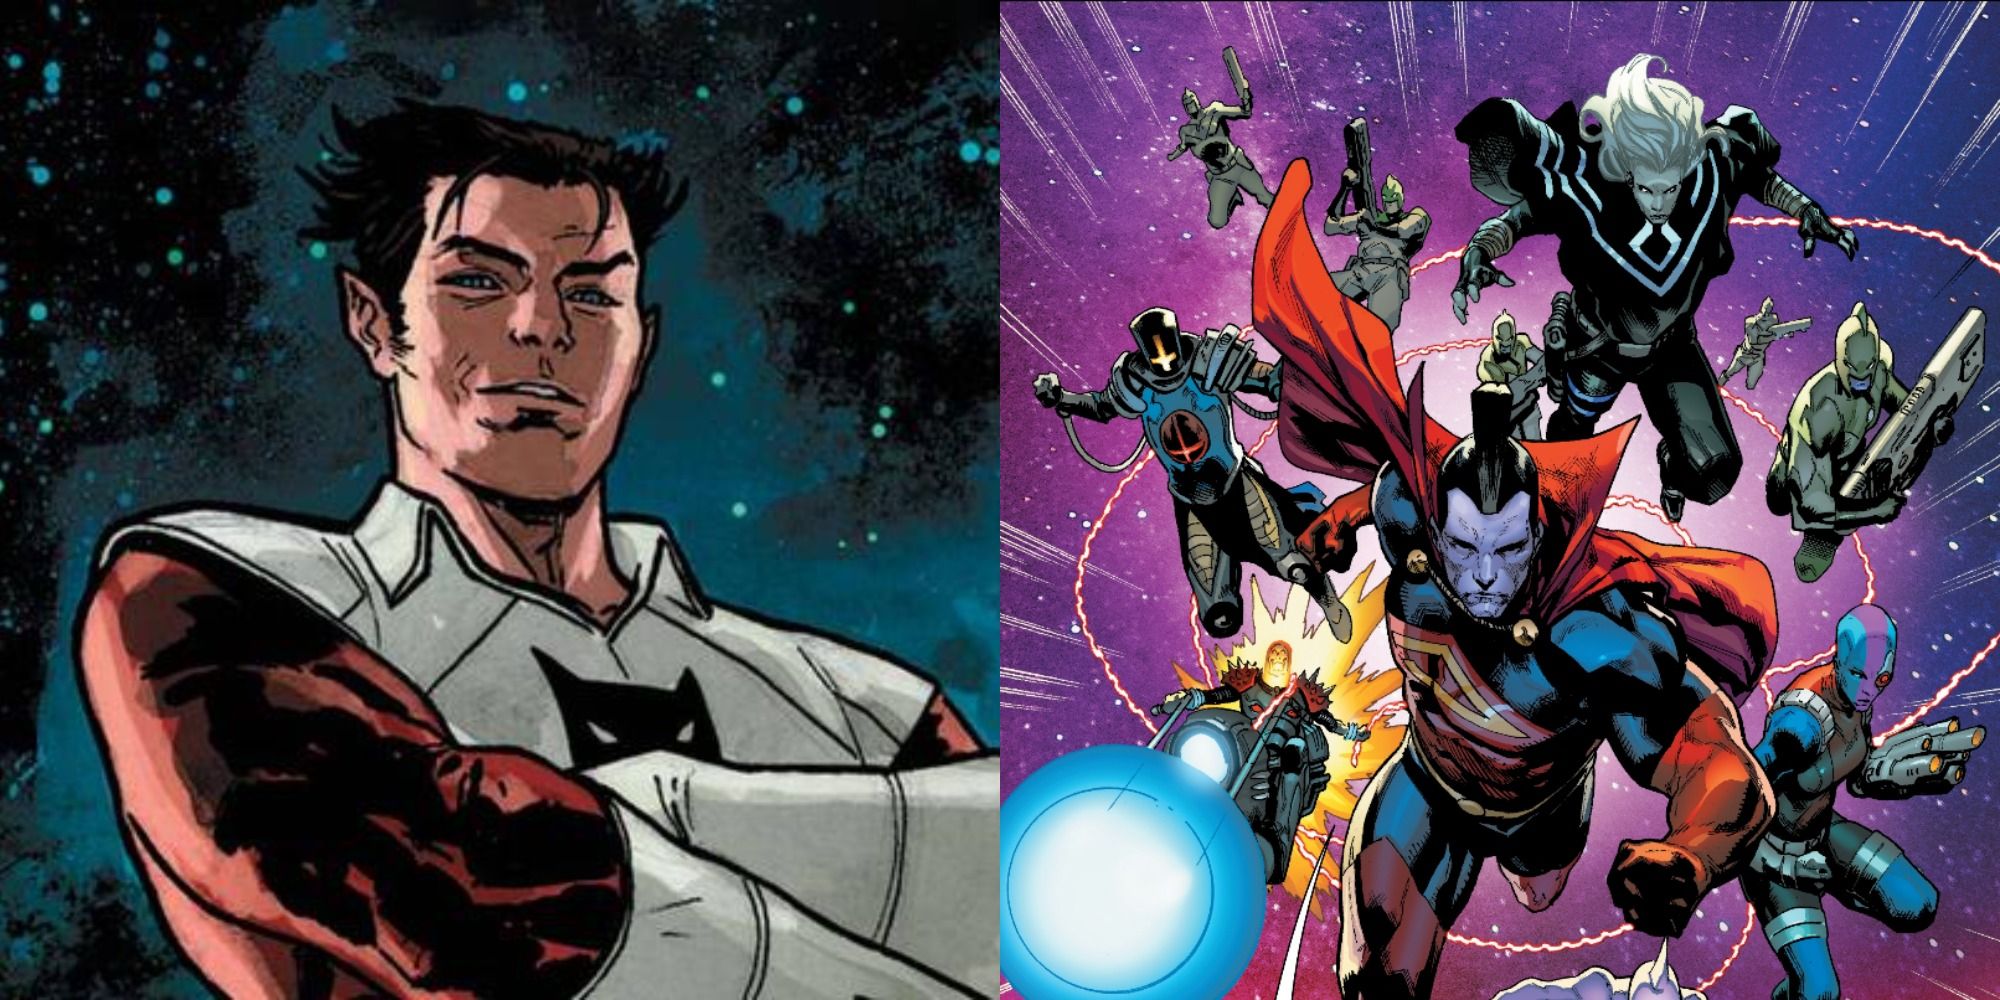 Marvel's Eternals: 10 Things Only Comic Book Fans Know About Eros/Starfox